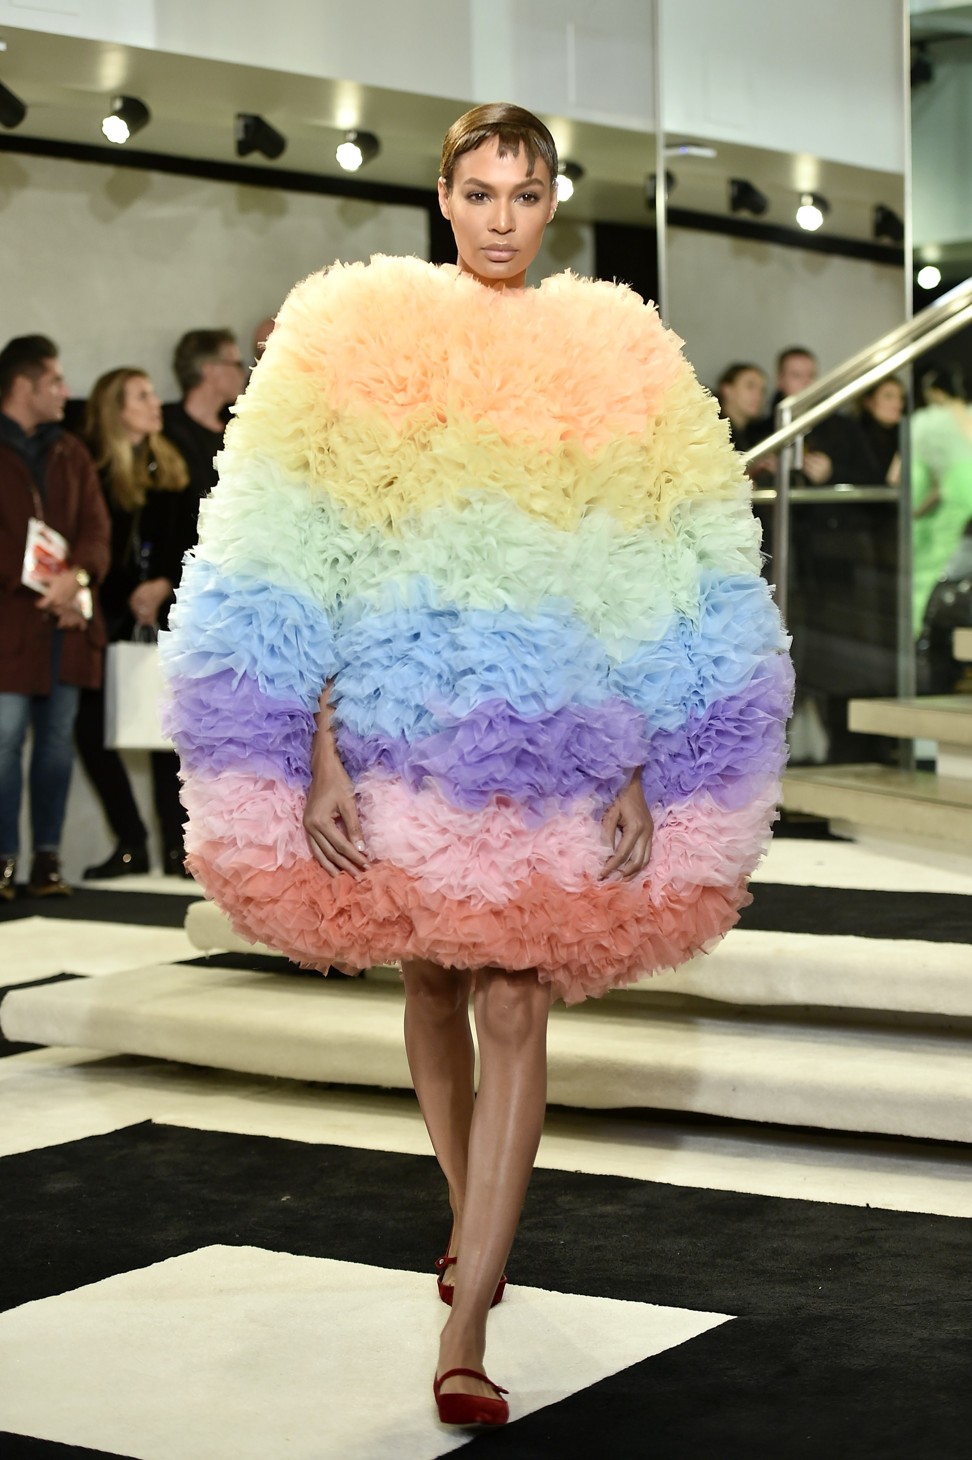 Joan Smalls models an outfit by Koizumi at the New York show. Photo: Steven Ferdman/Getty Images/AFP